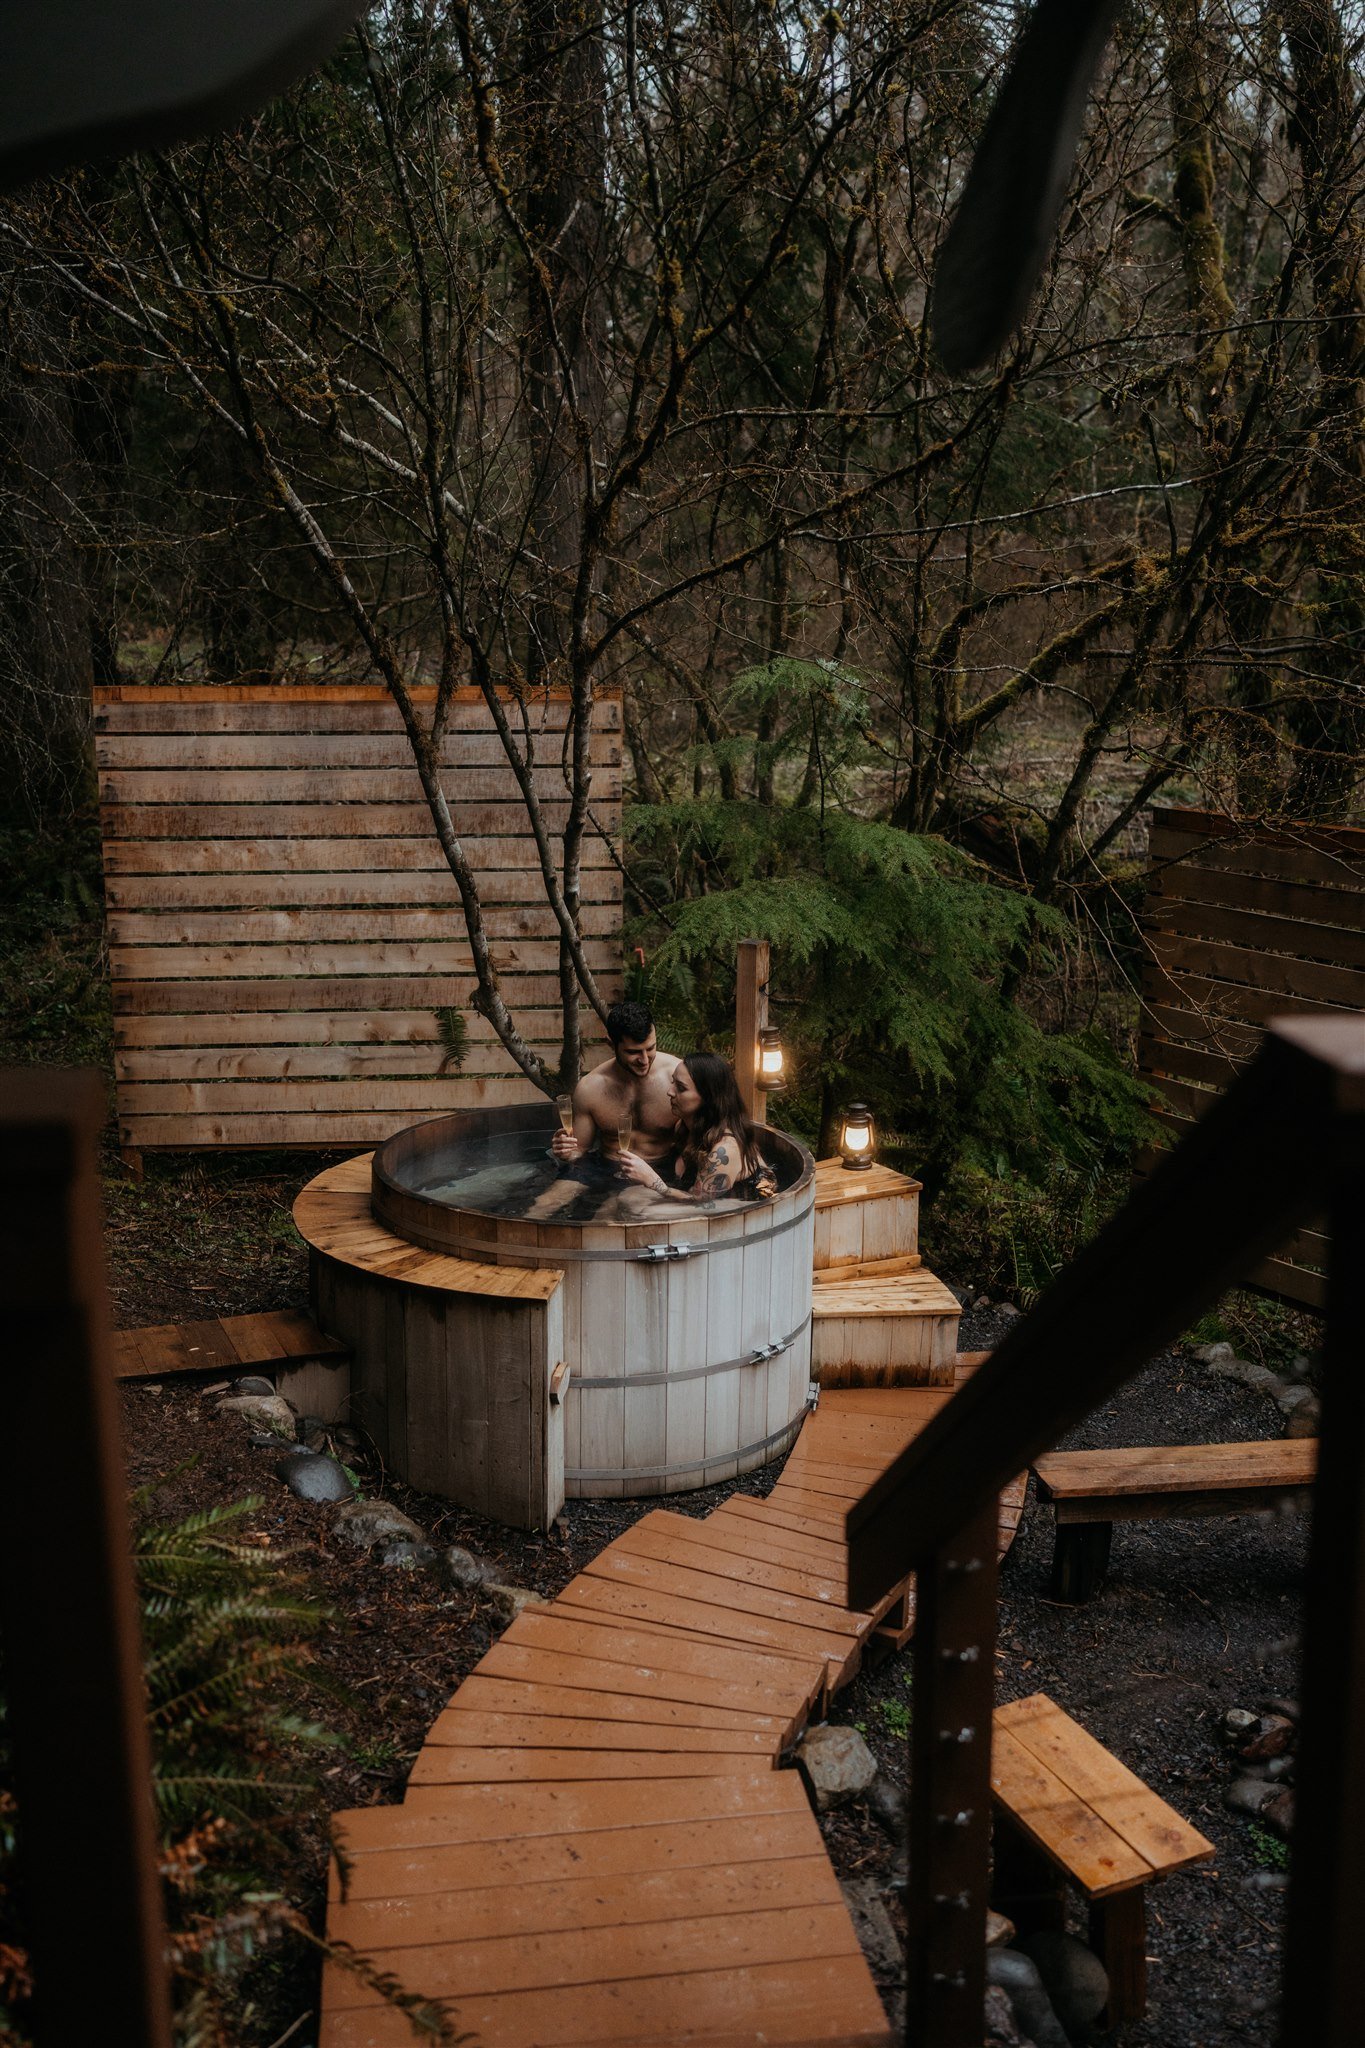 Bride and groom drink champagne in barrel hot tub after snowy hiking elopement